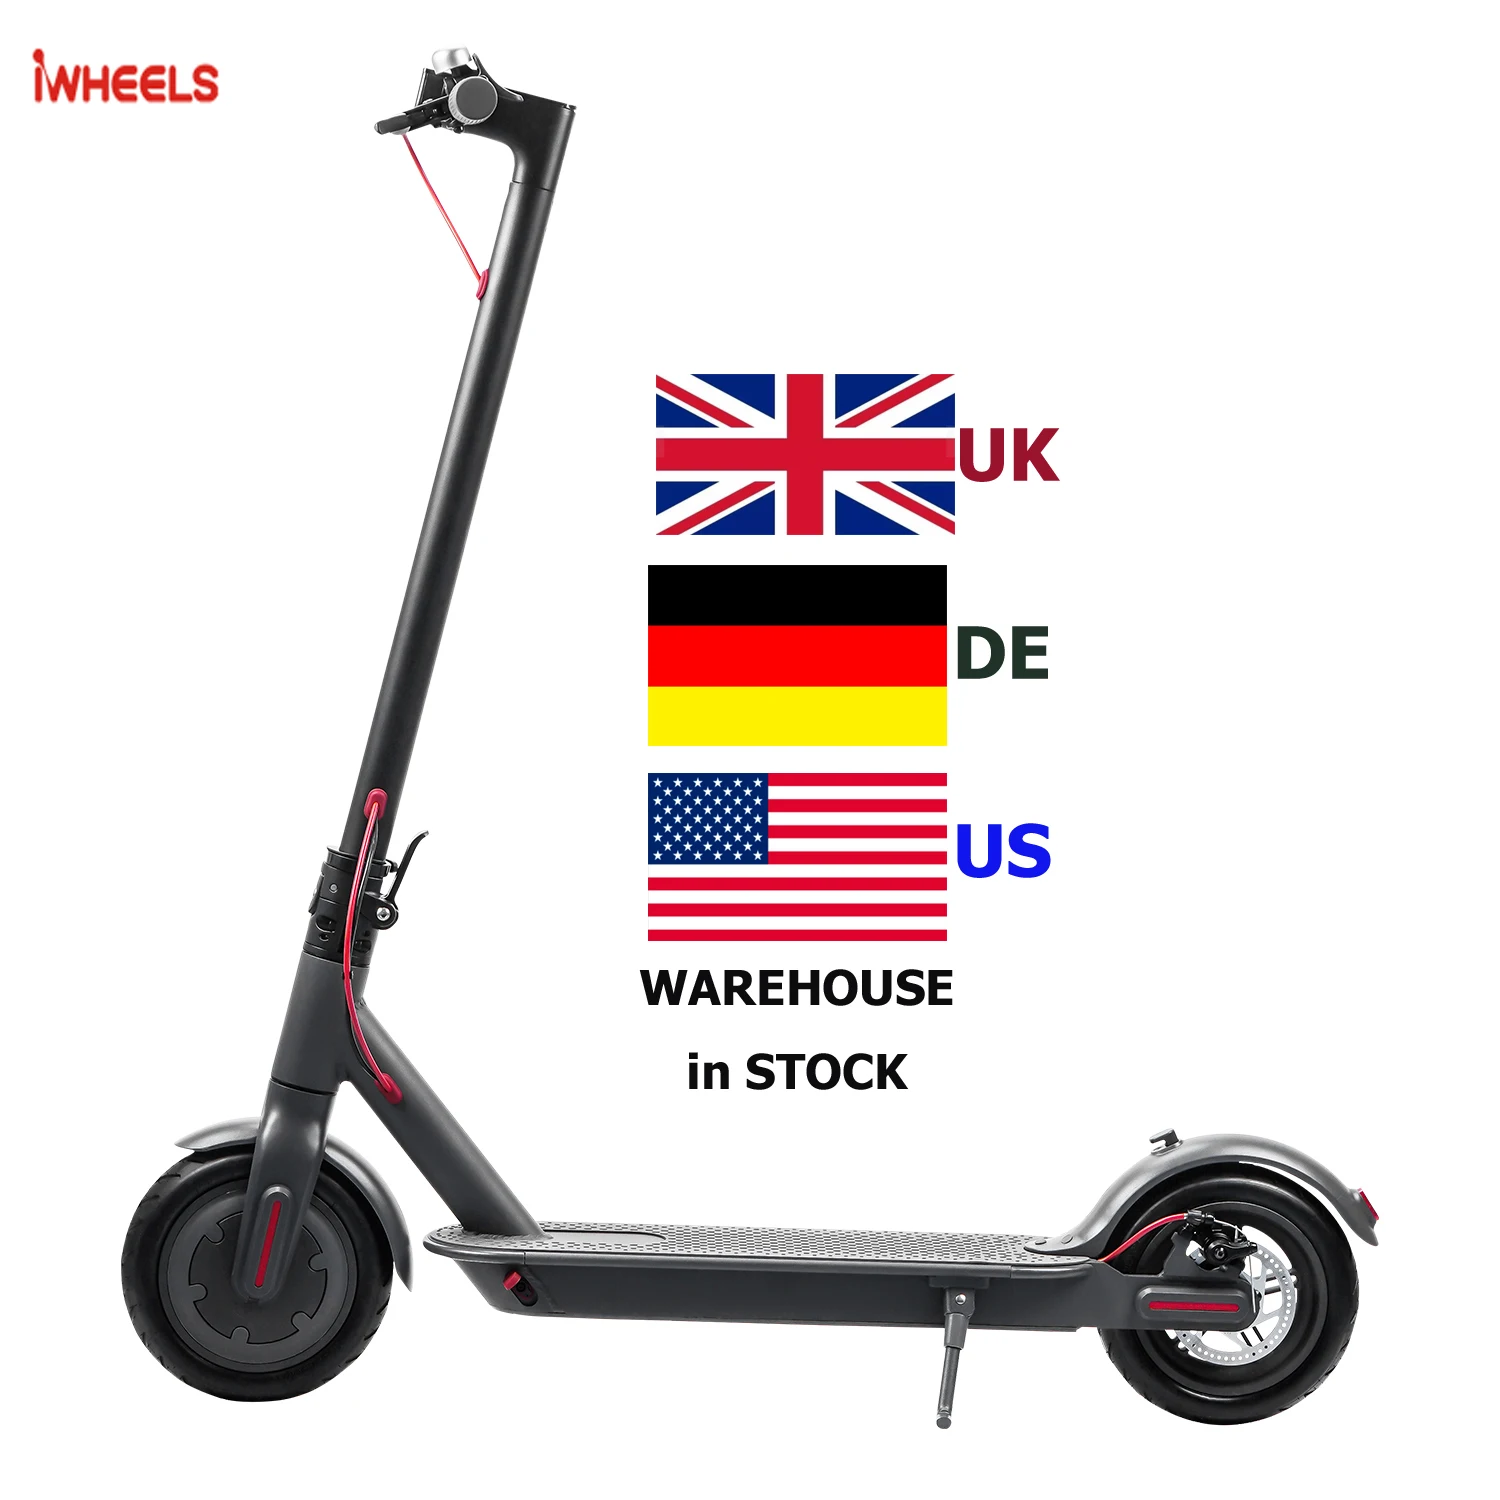 

Top Quality 36V 7.8Ah With CE RoHS MSDS FCC Max Load 120Kg Super 33Km Electric Folding Motorcycle Electric Adult Scooter Europe